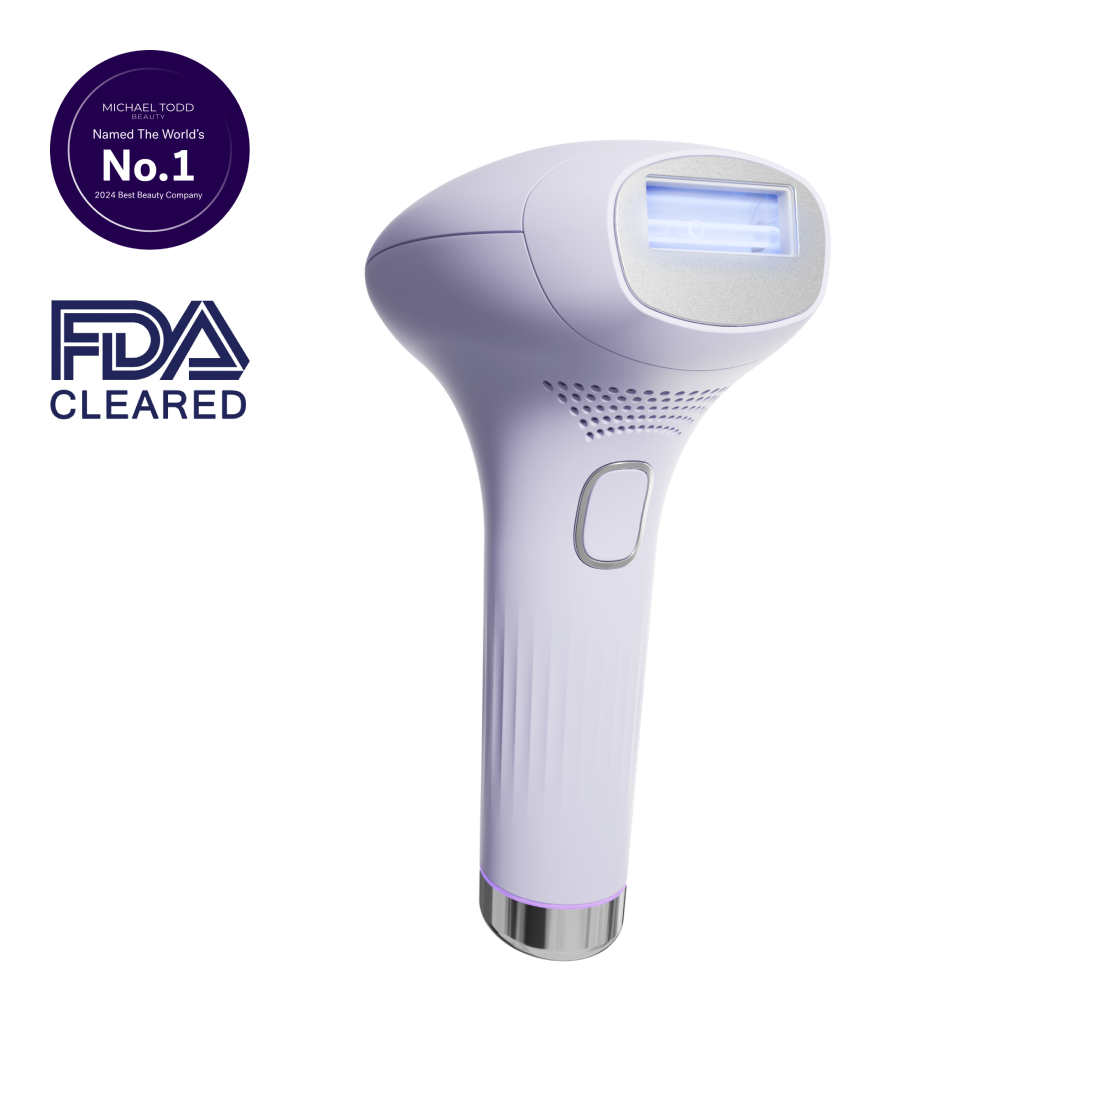 Lavender Lust - A handheld FDA-cleared device with a sleek purple handle and a power button, designed for personal use, with a label indicating it was named "World's No. 1" by Michael Todd Beauty in 2024 Best Brands.